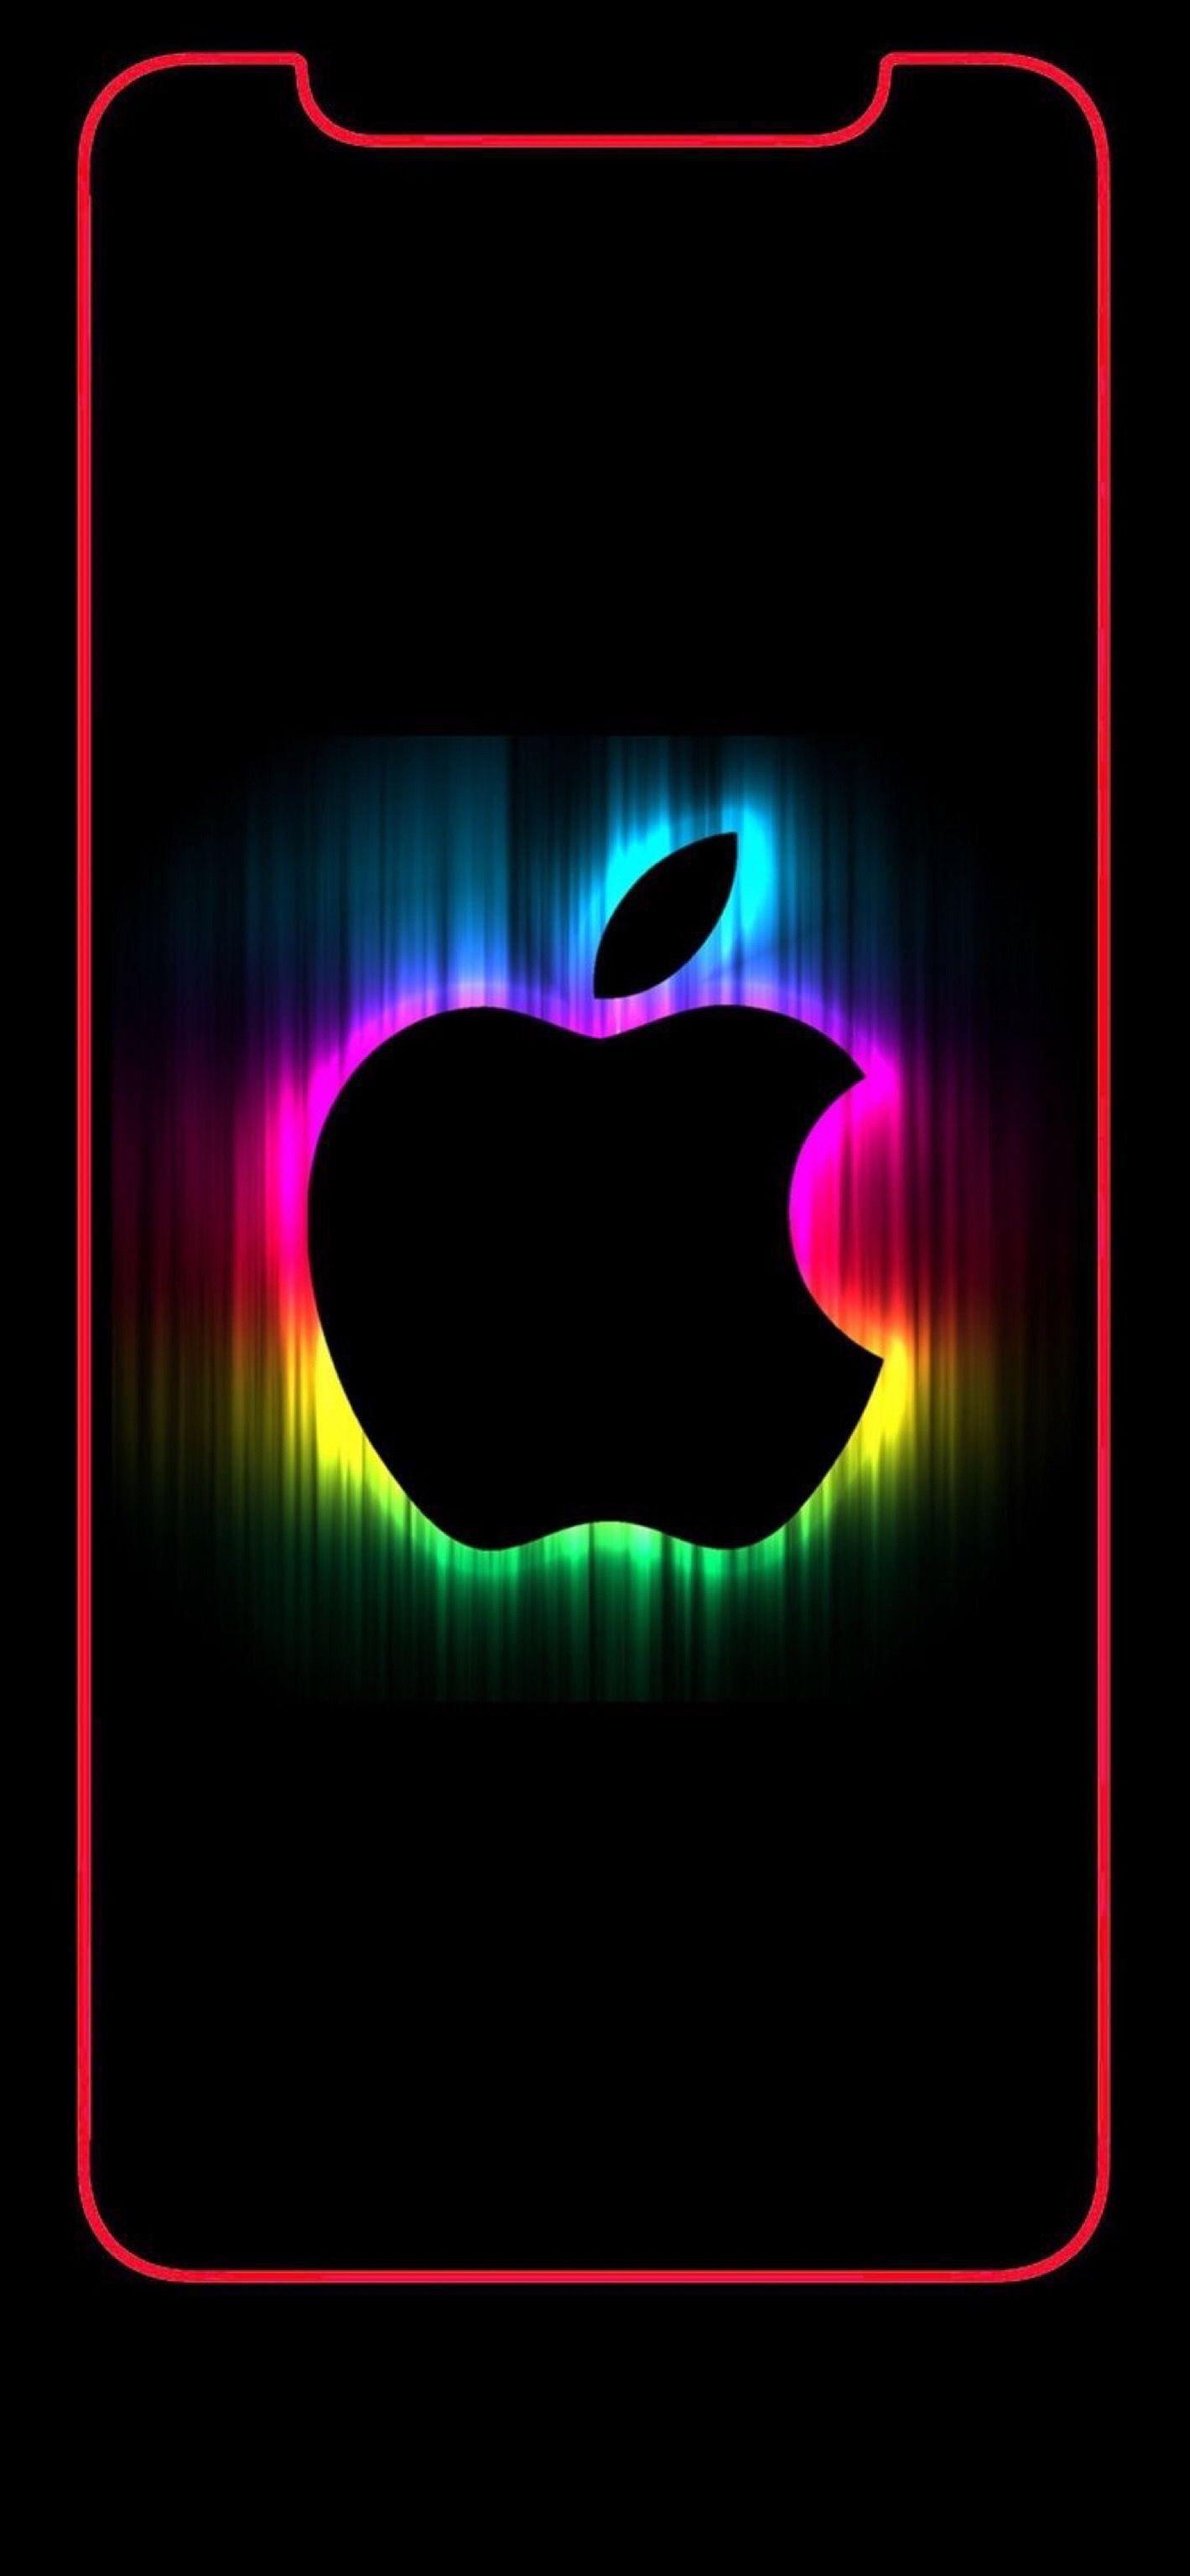 Iphone X Apple Logo Wallpapers Top Free Iphone X Apple Logo Backgrounds Wallpaperaccess